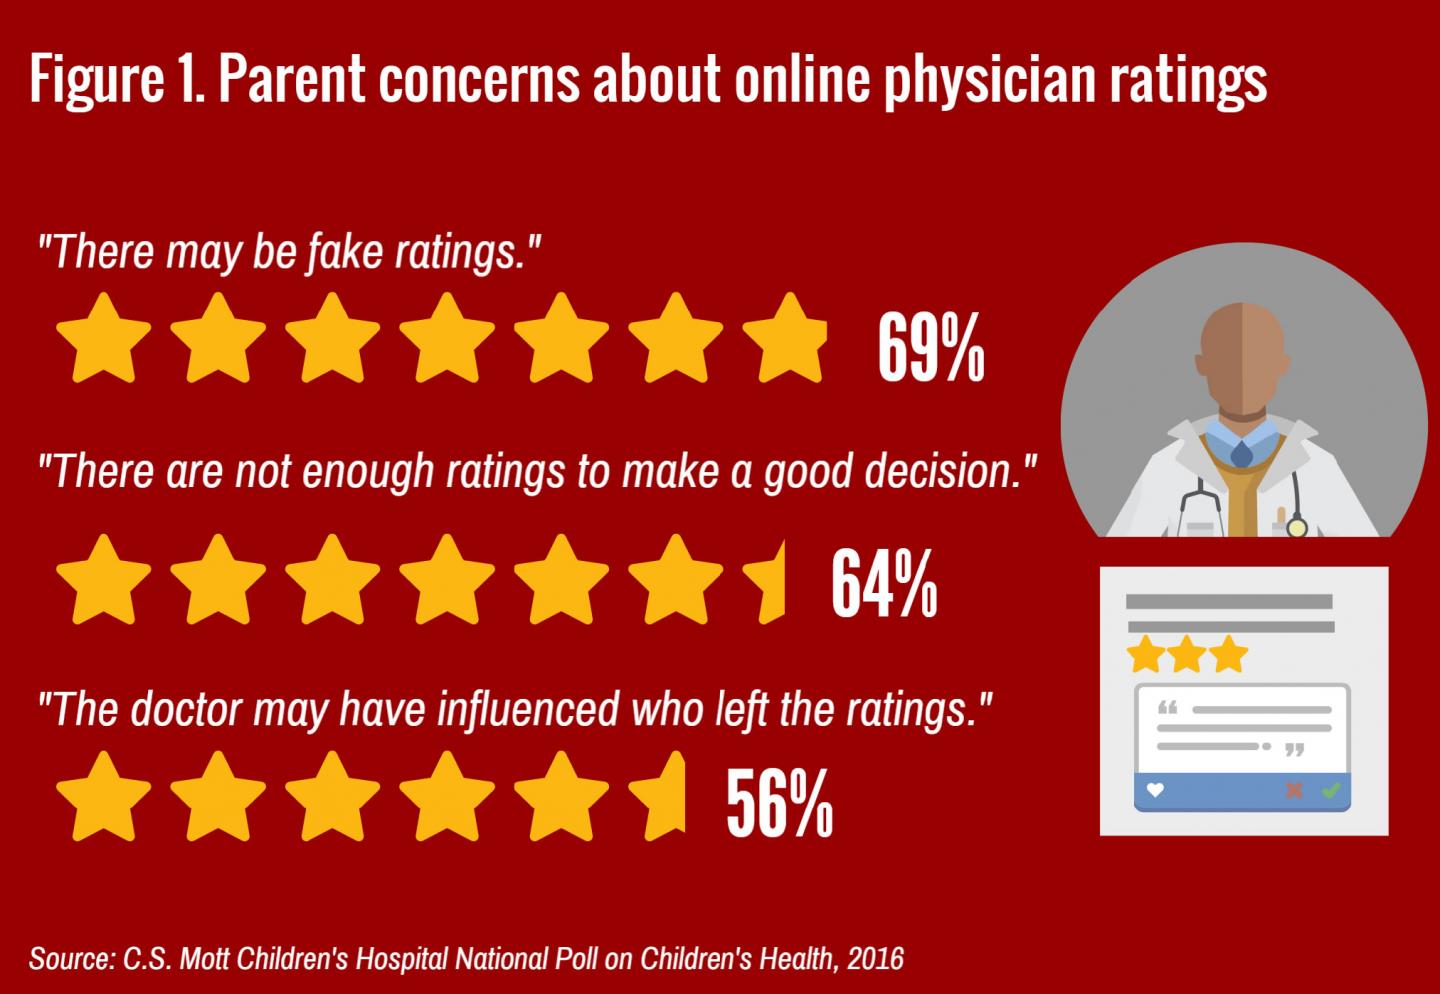 Do Parents View Online Doctor Ratings as Fact or Fake?